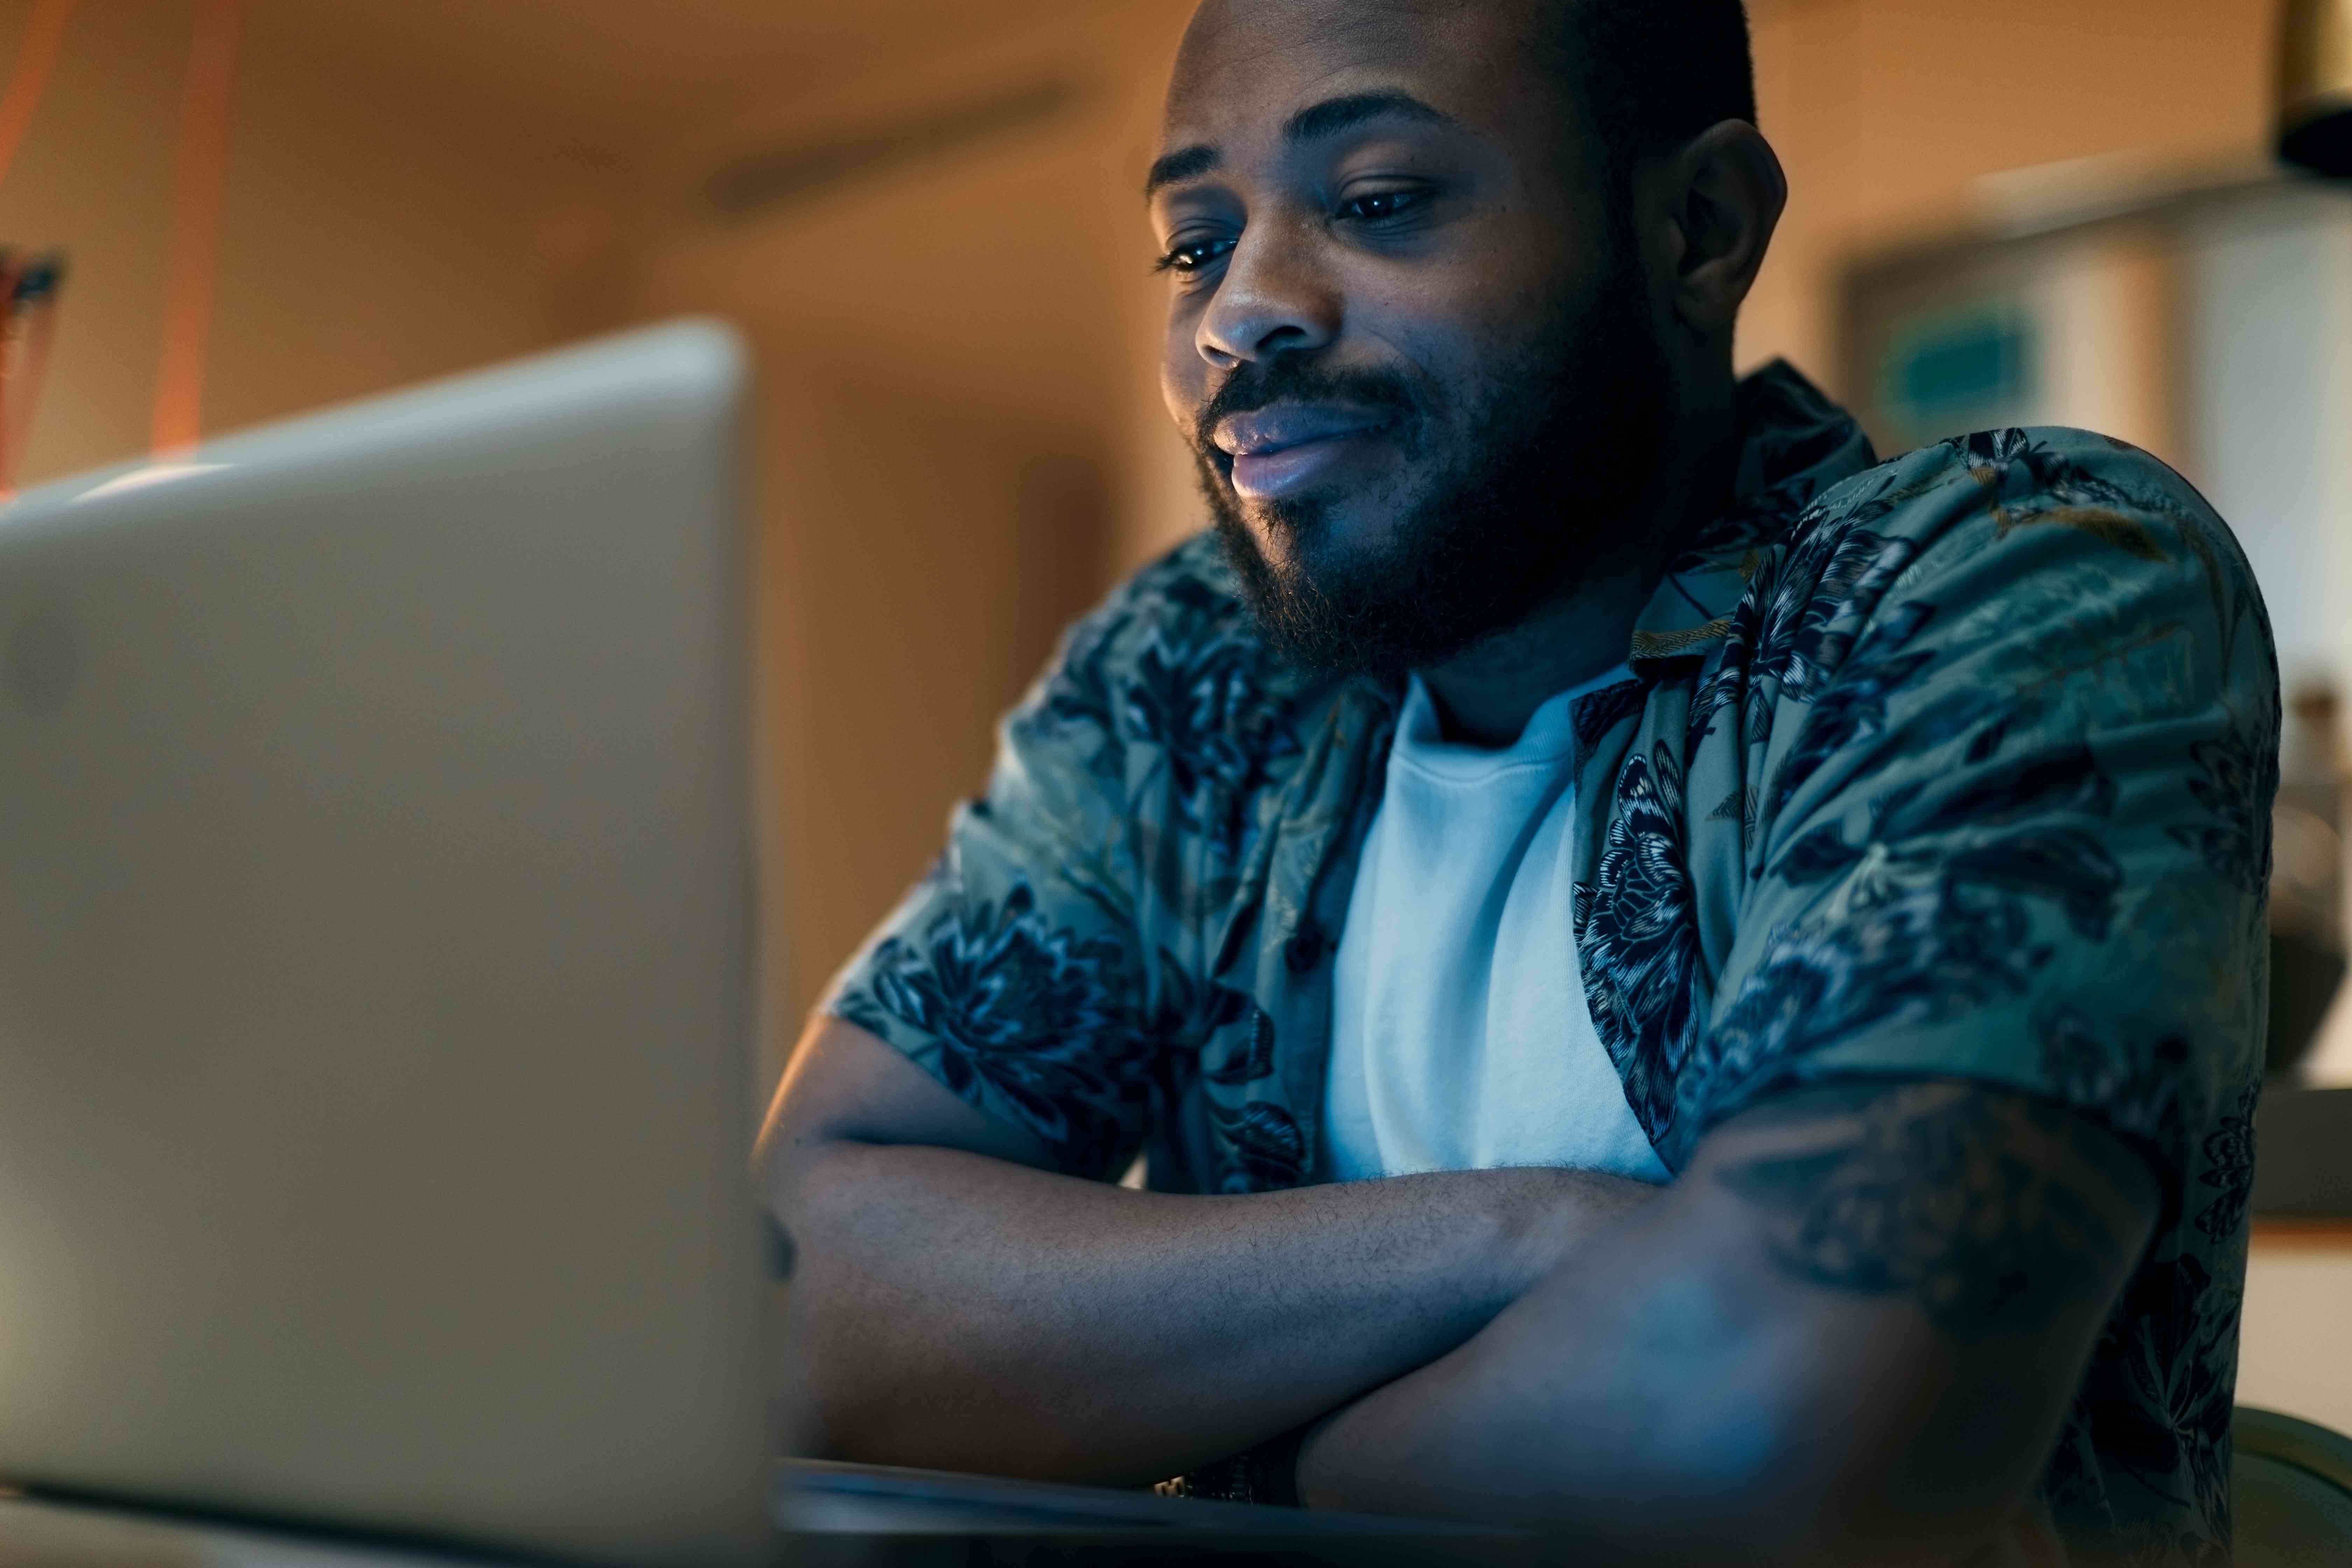 Man in his 20s or 30s sitting at home and looking at his laptop with a slight smile